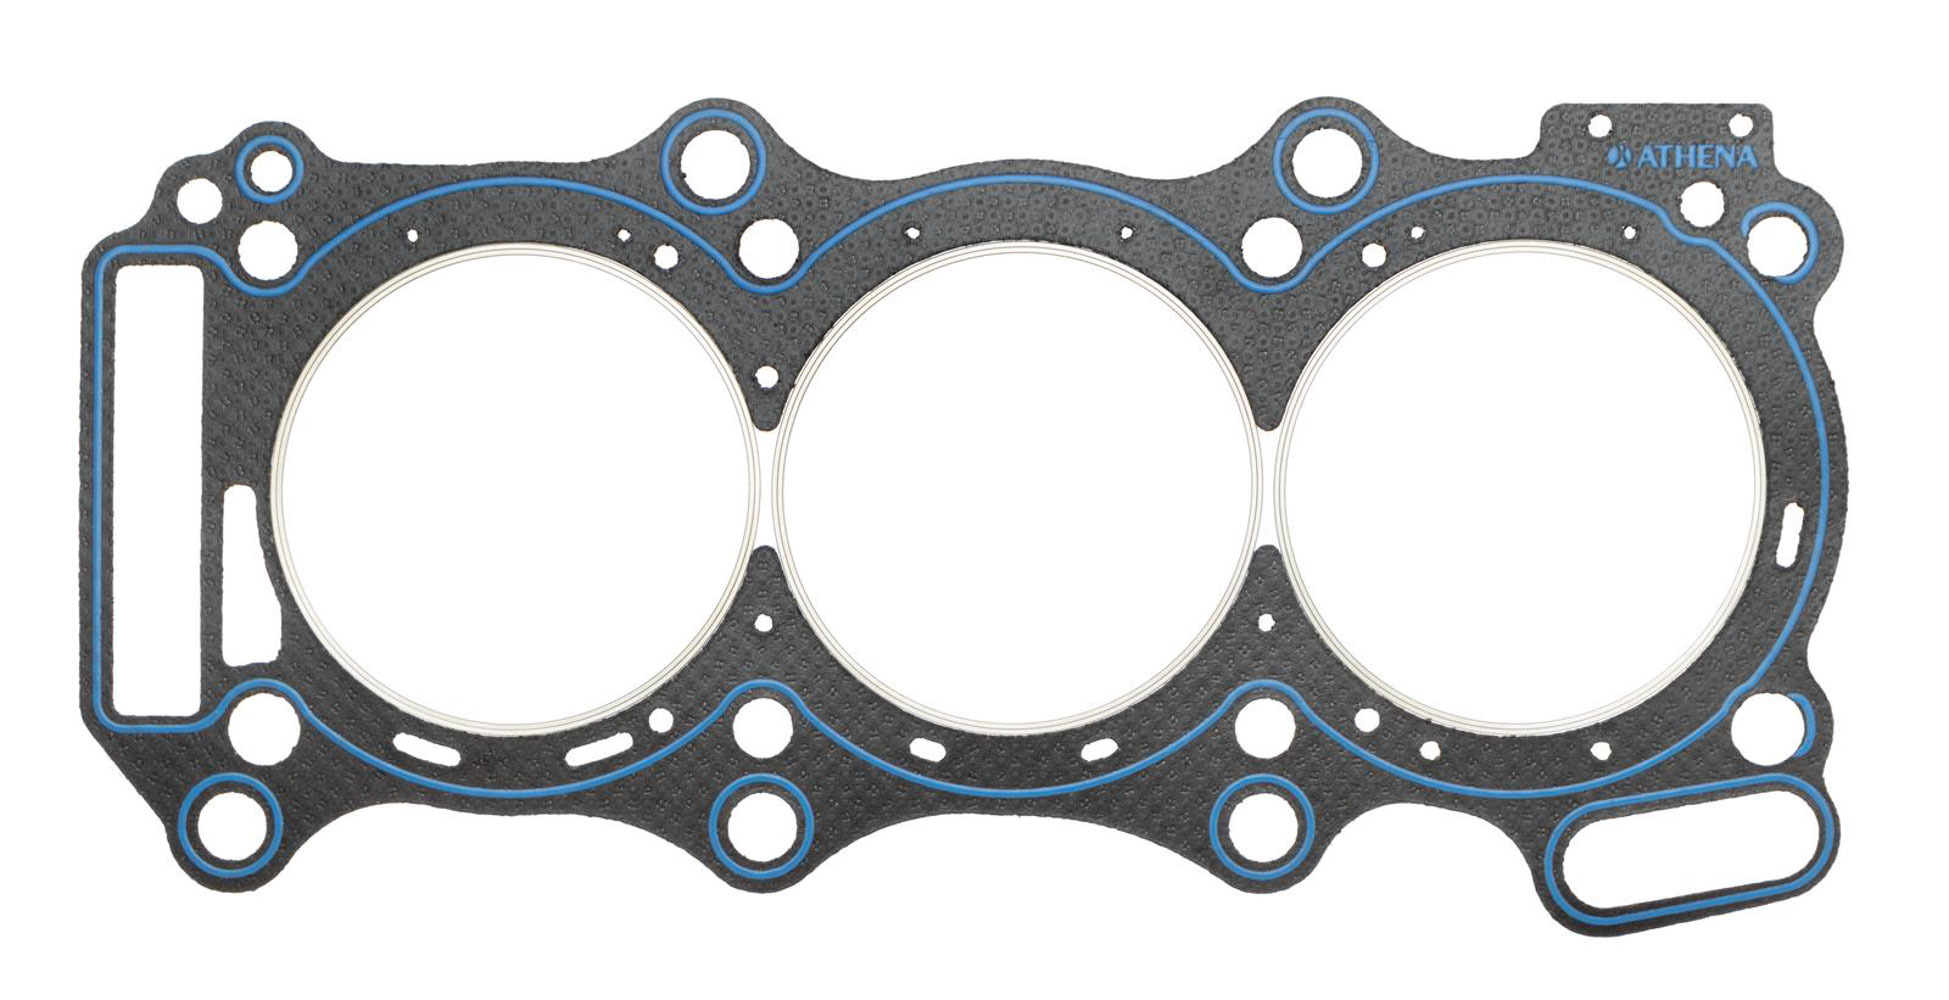 SCE Gaskets CR330088R - Cylinder Head Gasket, Vulcan Cut Ring, 96.50 mm Bore, 0.990 mm Compression Thickness, Steel Core Laminate, Passenger Side, Nissan 4-Cylinder, Each